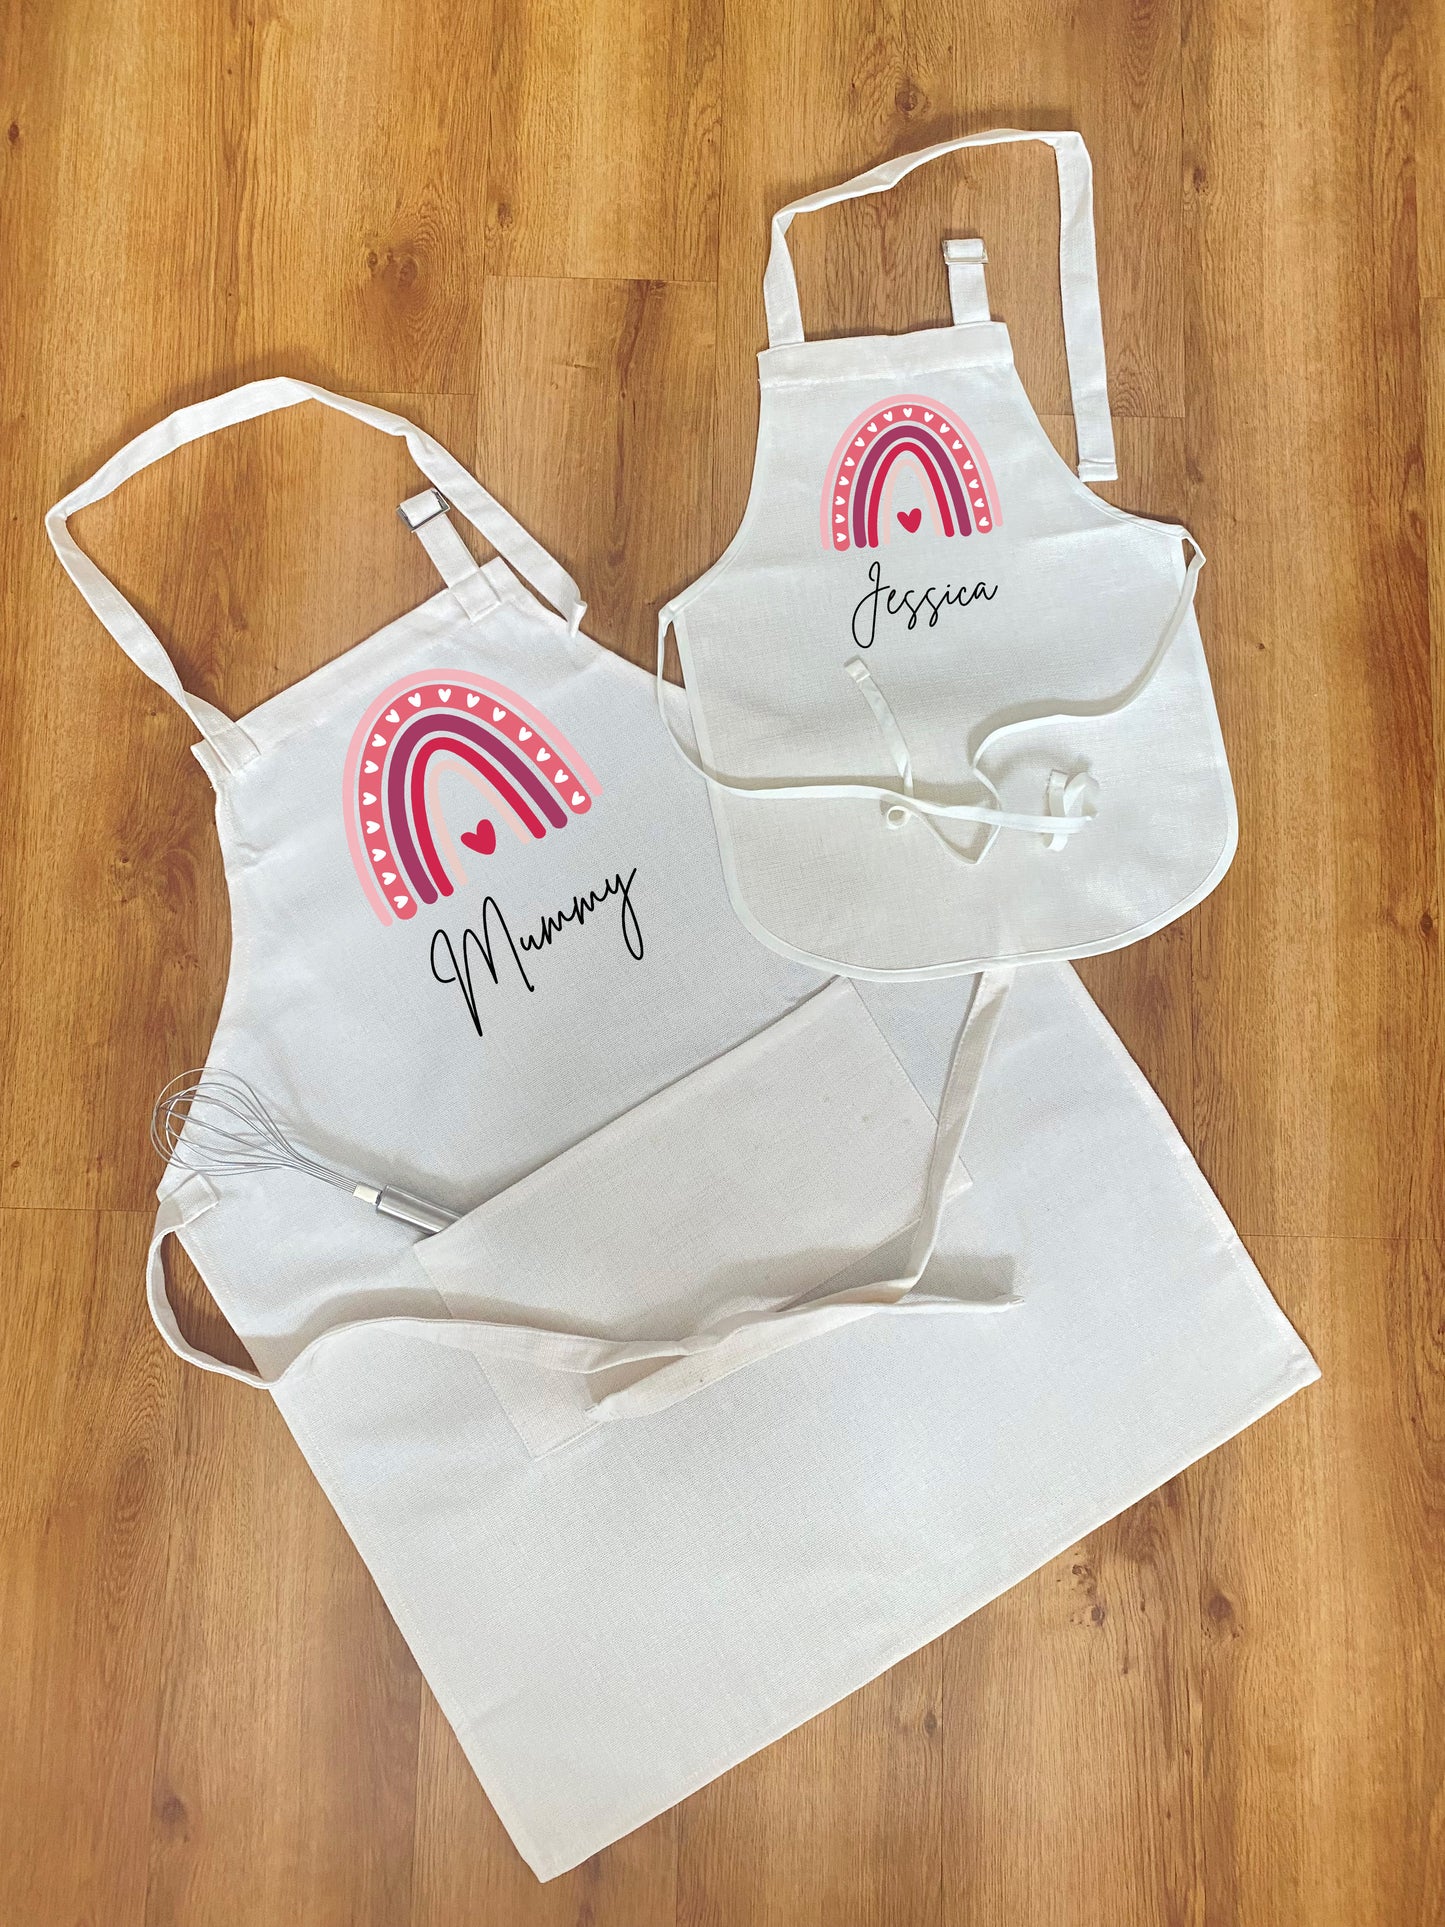 Personalised Mother's Day Gifts - Mother Daughter Aprons - Pink Rainbow Aprons - Design Available In 3 Sizes